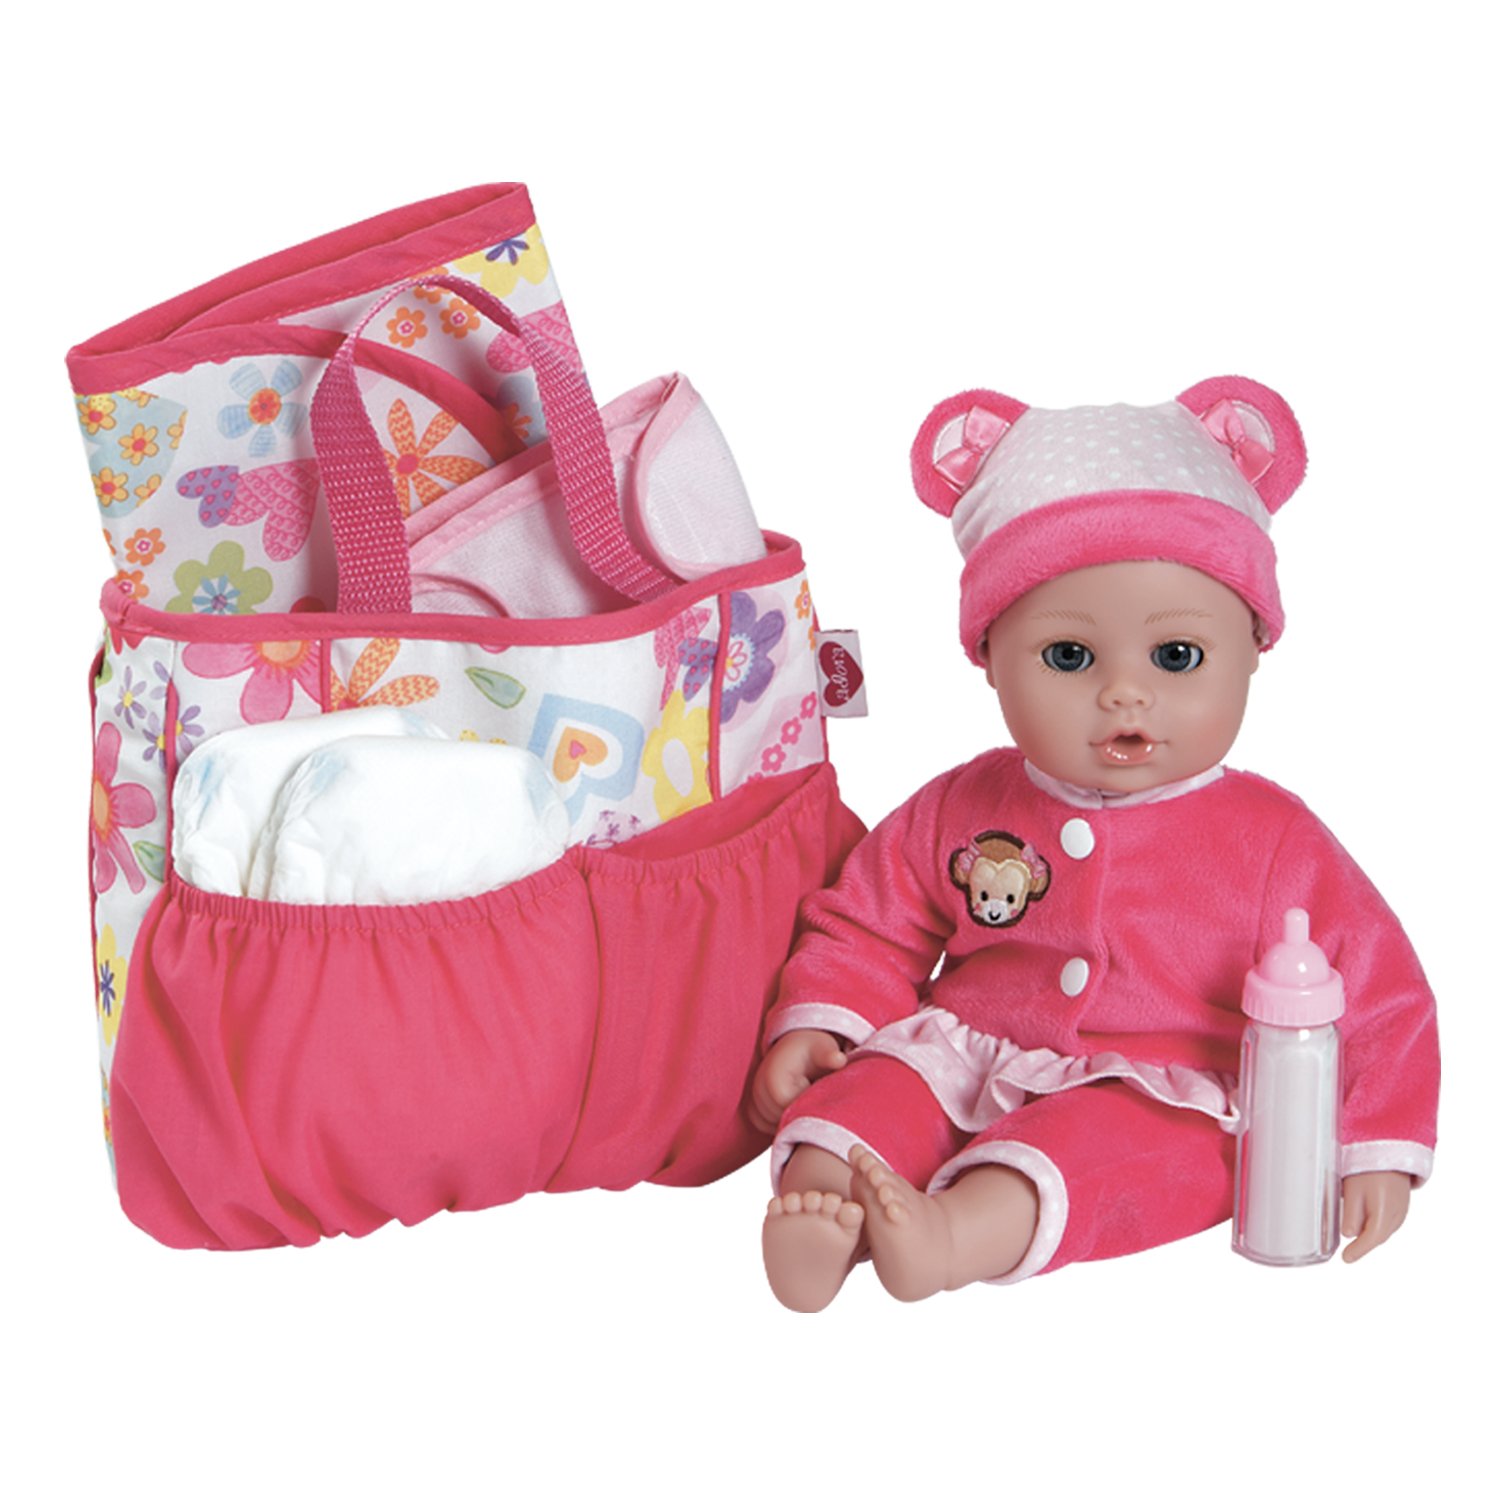 Adora 20603021 Baby Doll Diaper Bag Accessories with 5Piece Changing Set